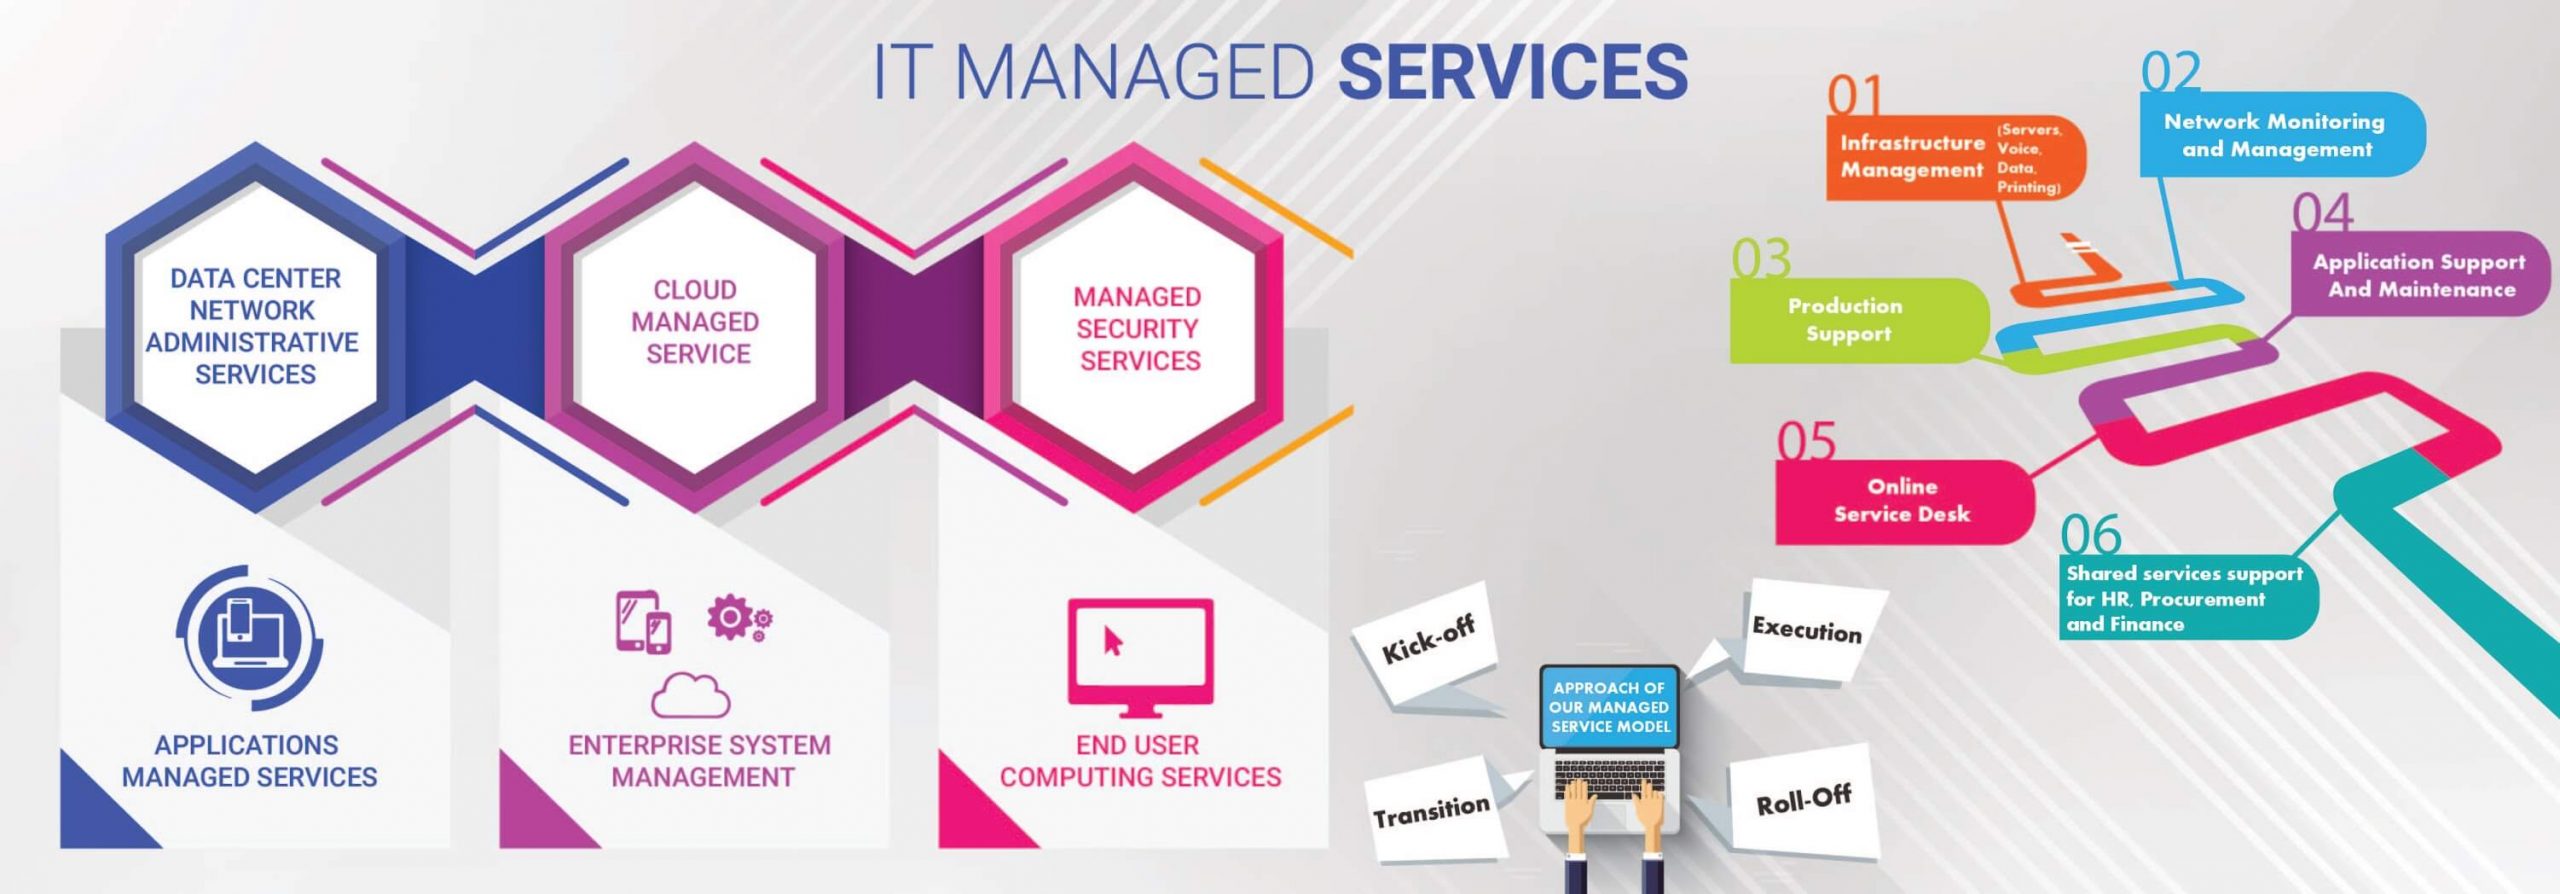 Managed it services